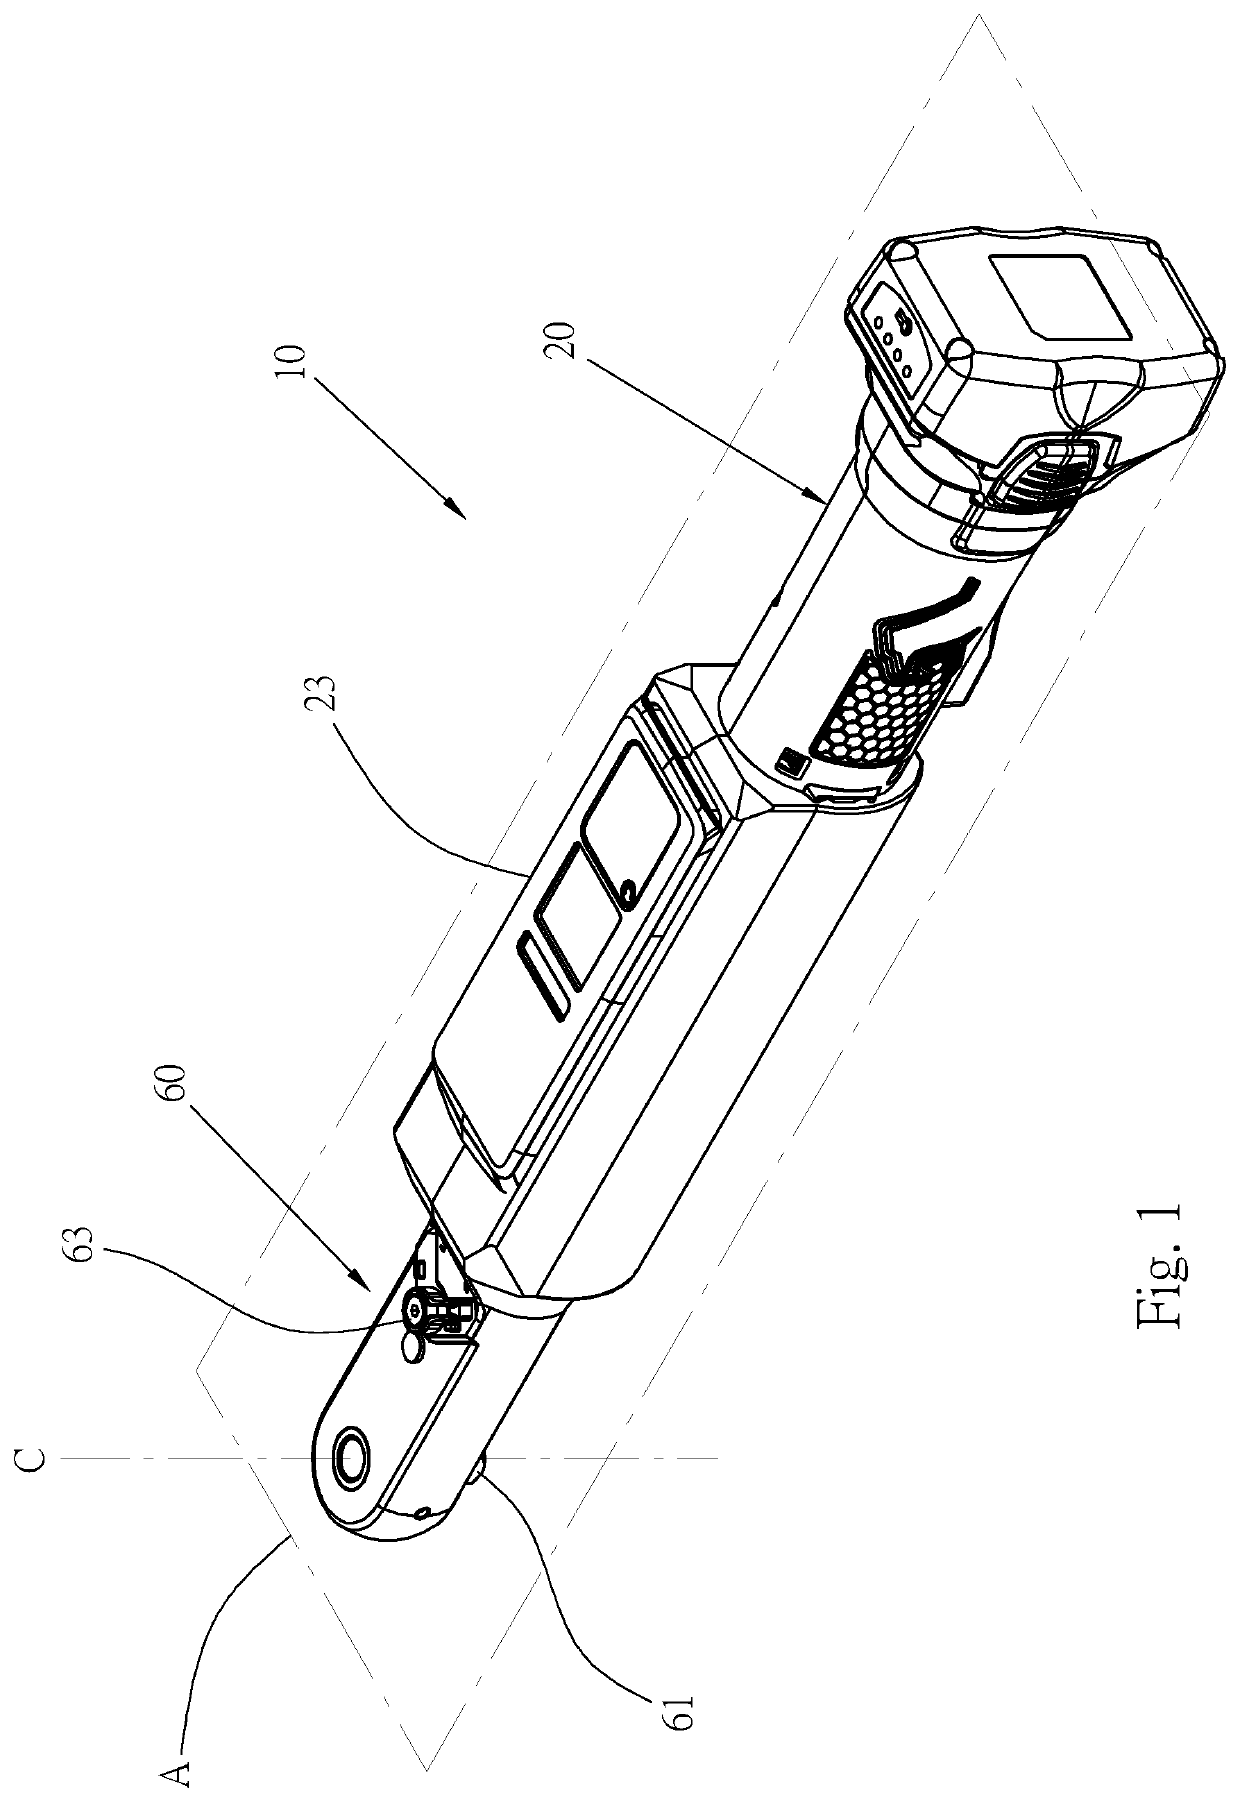 Electric torque wrench capable of sensing manual operating torque